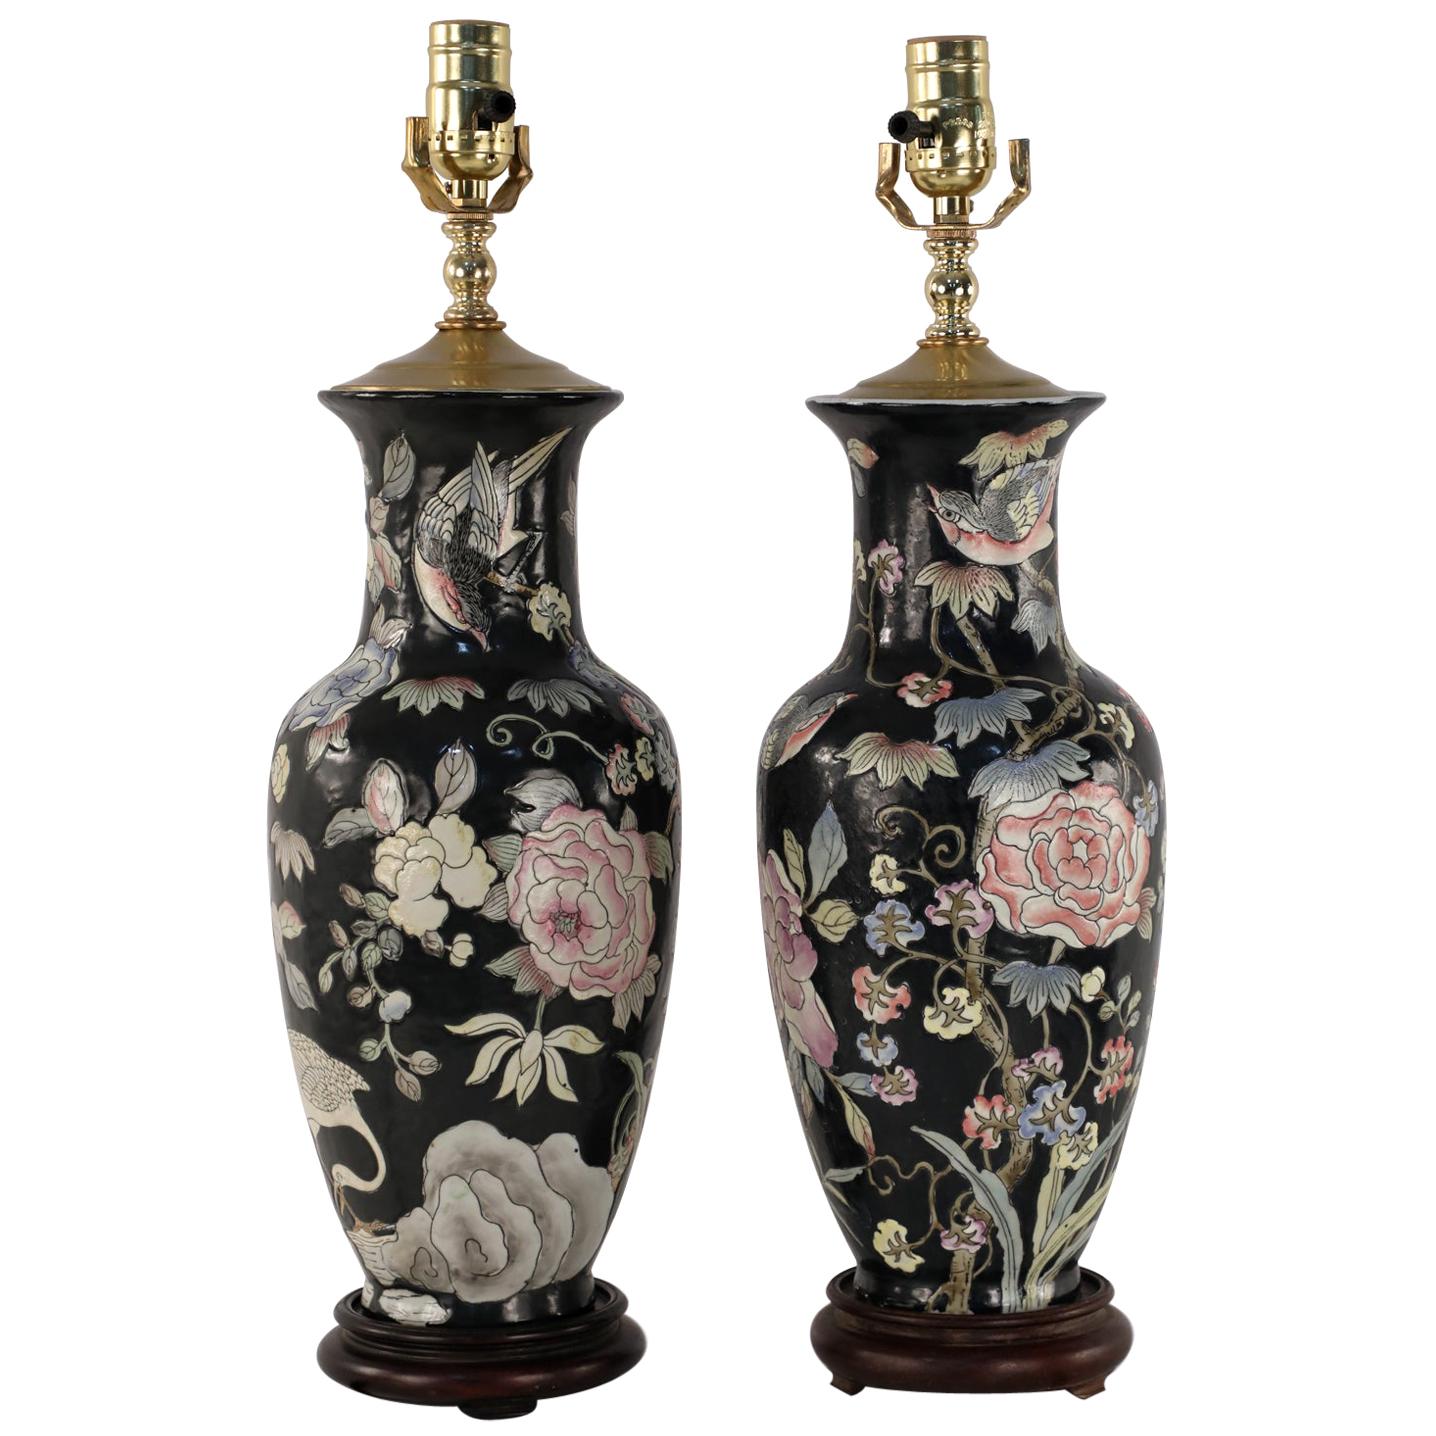 Pair of Chinese Black and Floral Motif Table Lamps